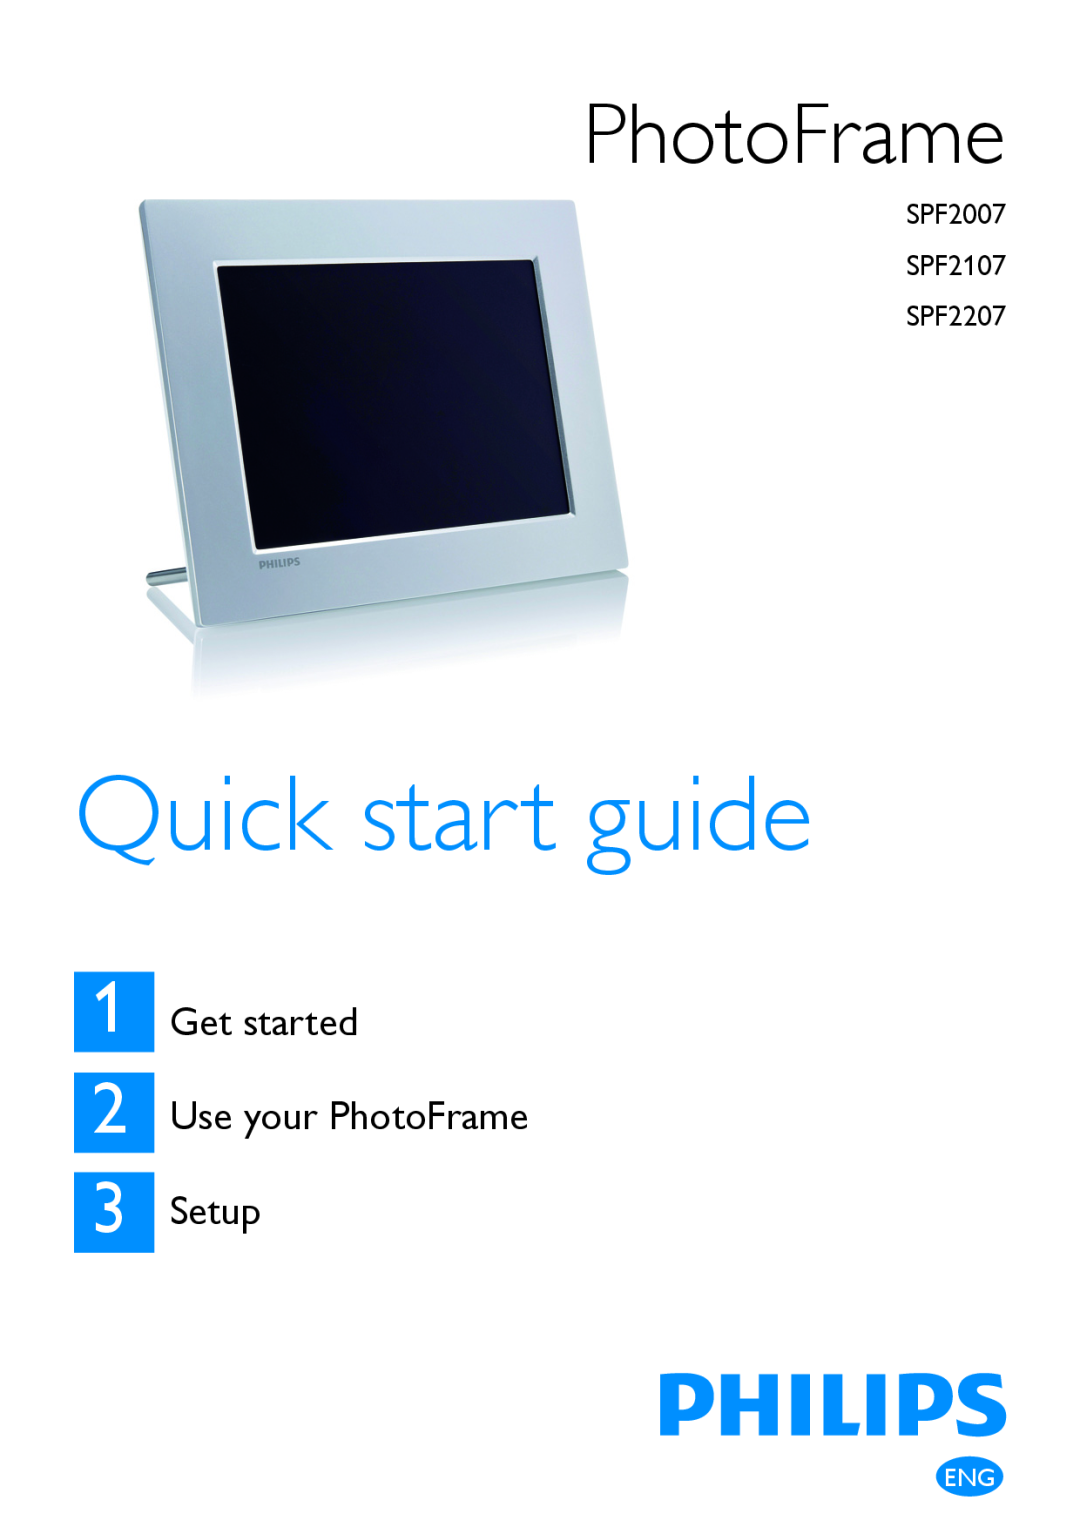 Philips SPF2107, SPF2207, SPF2007 quick start Quick start guide, Get started Use your PhotoFrame Setup 